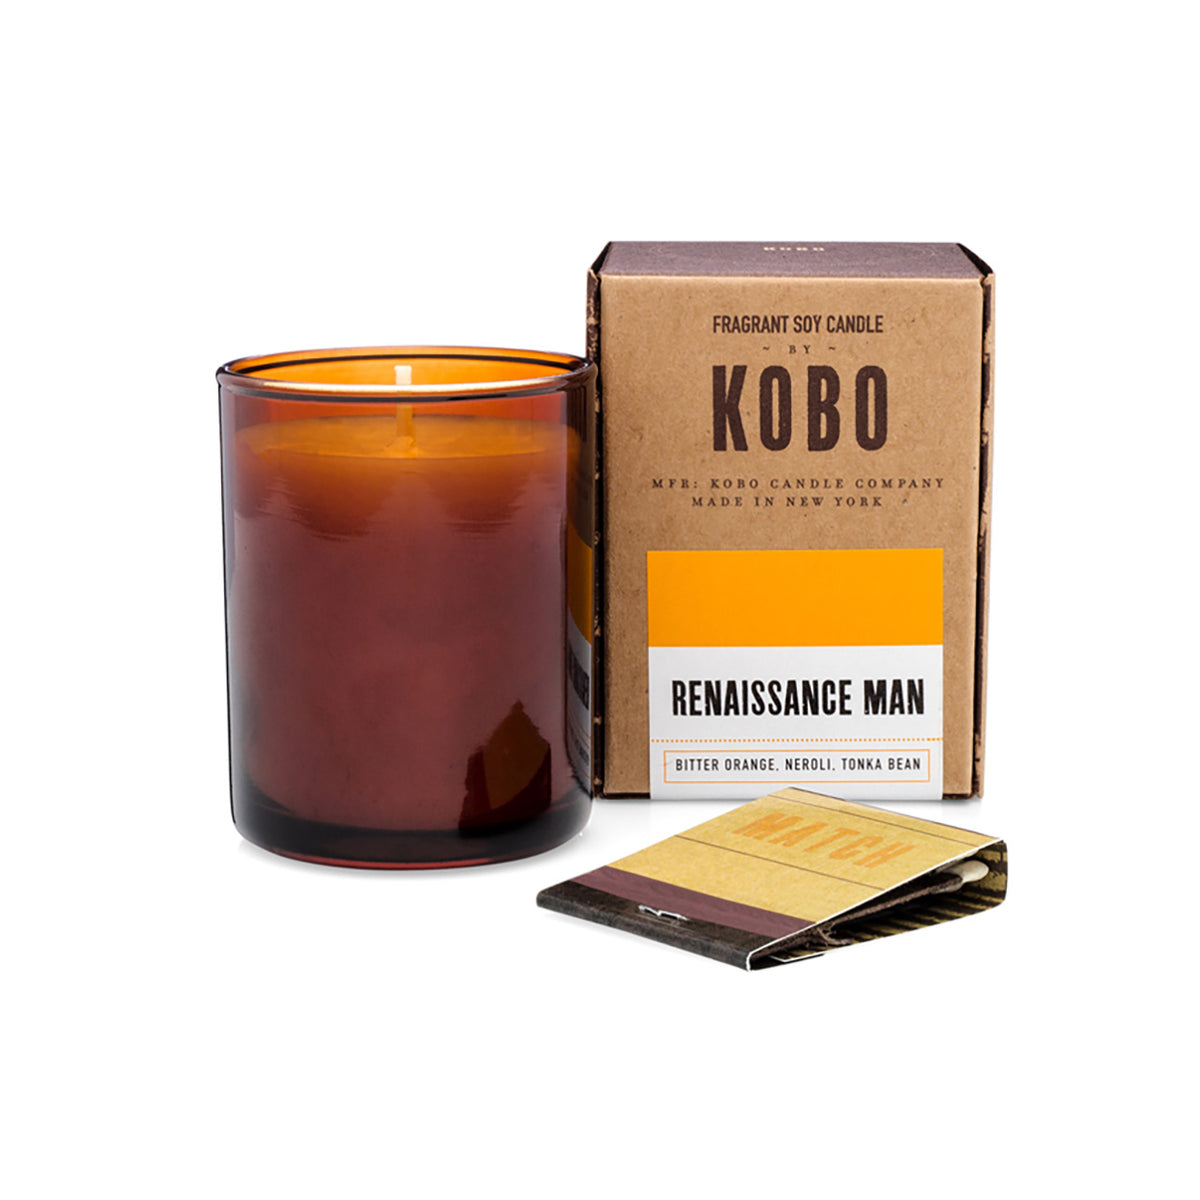 Kobo Pure Soy votive candle in an amber glass jar with ceramic matches and kraft box. Renaissance Man scent